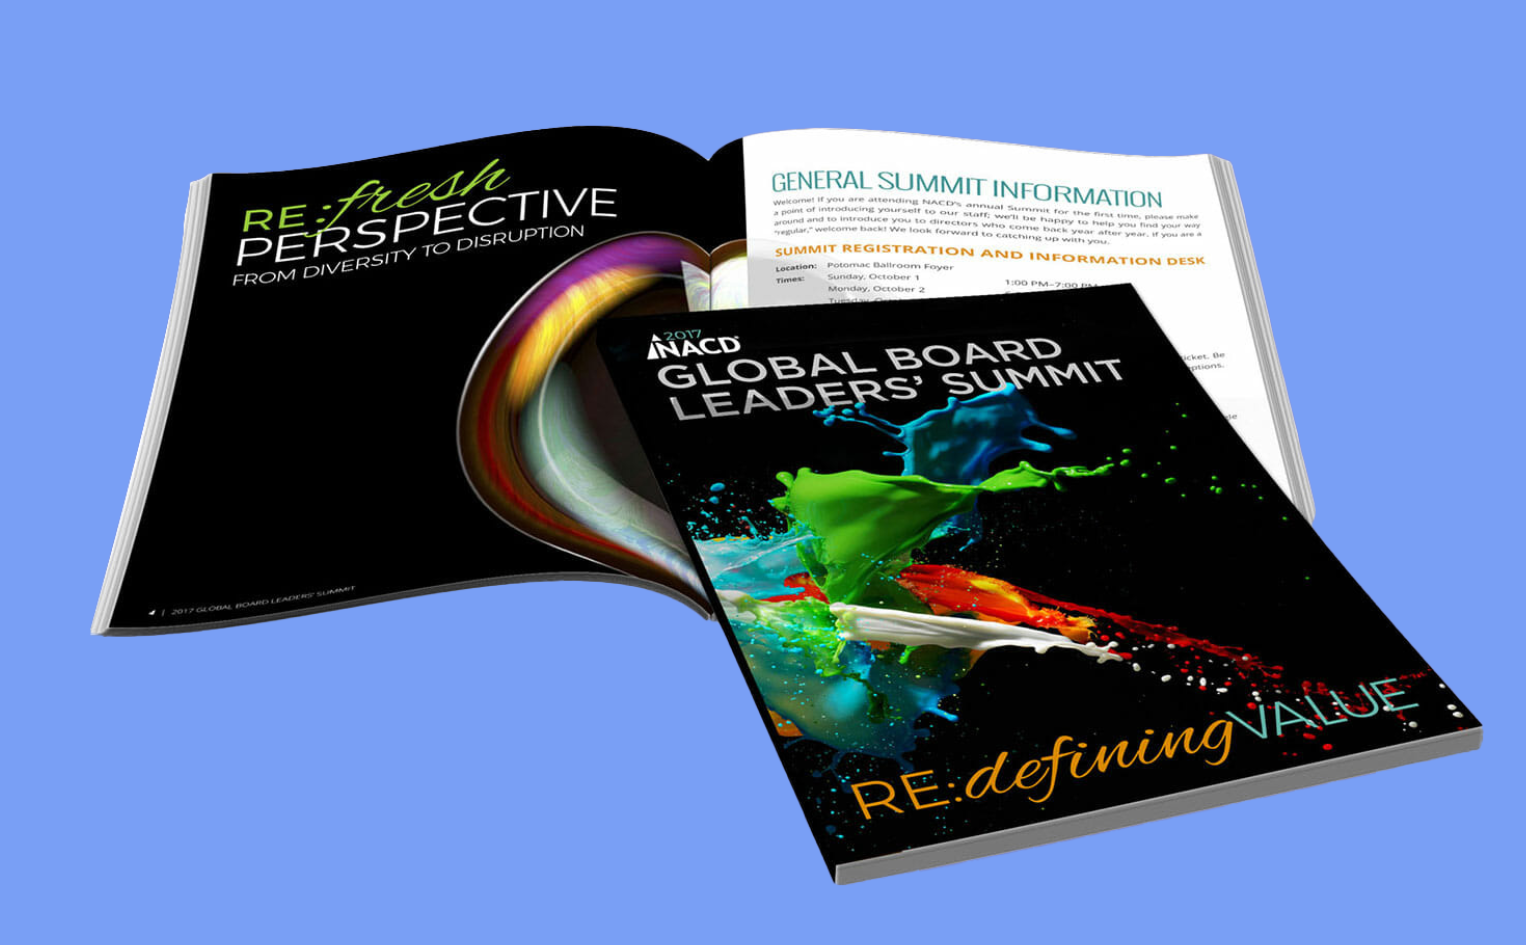 An open brochure for the NACD Global Board Leaders' Summit featuring vibrant, abstract artwork and the theme "re:defining value".